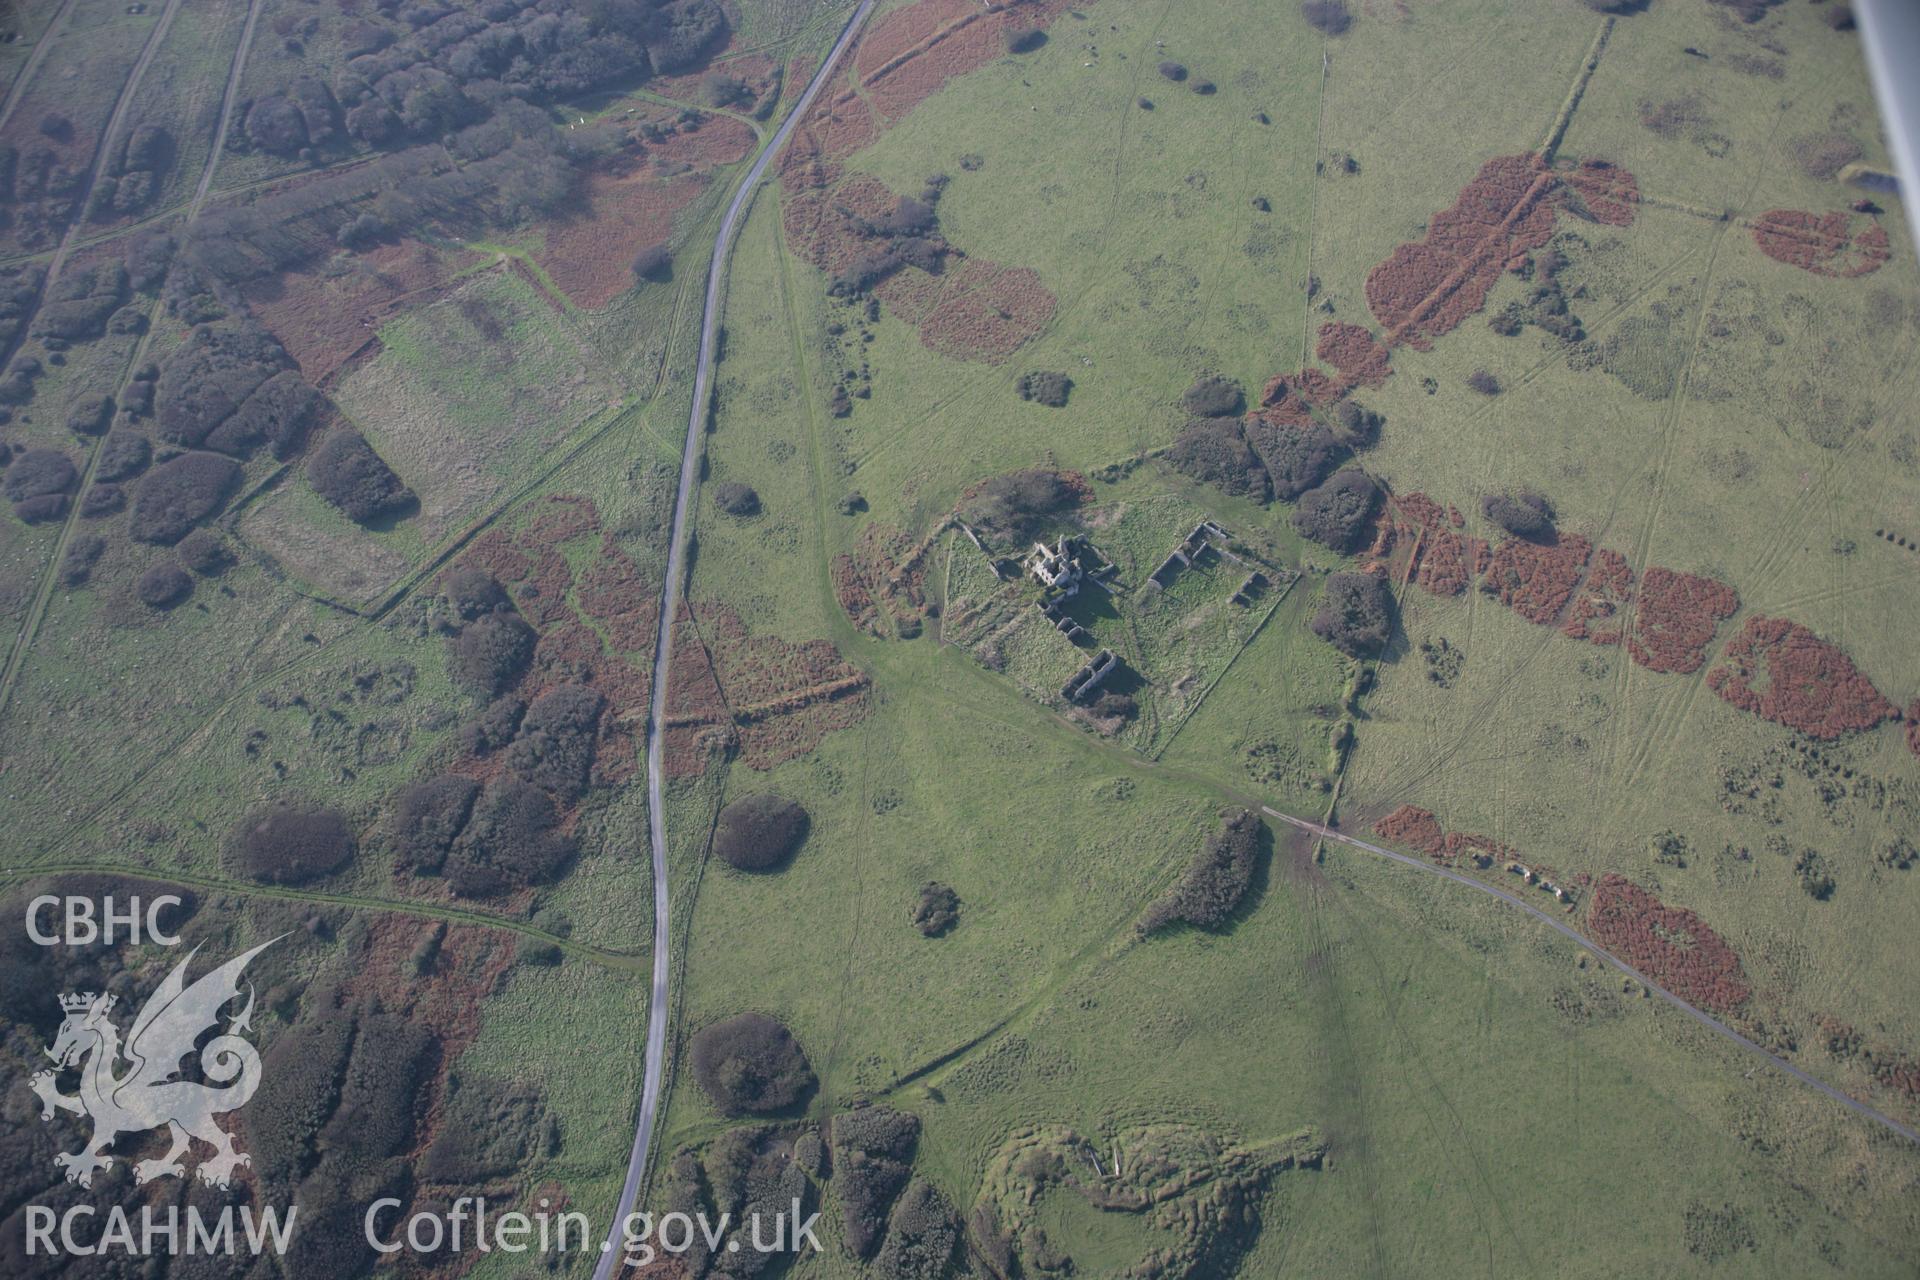 RCAHMW colour oblique aerial photograph of Pricaston Farmstead, Castlemartin, from the north showing the earthworks of a deserted settlement. Taken on 19 November 2005 by Toby Driver